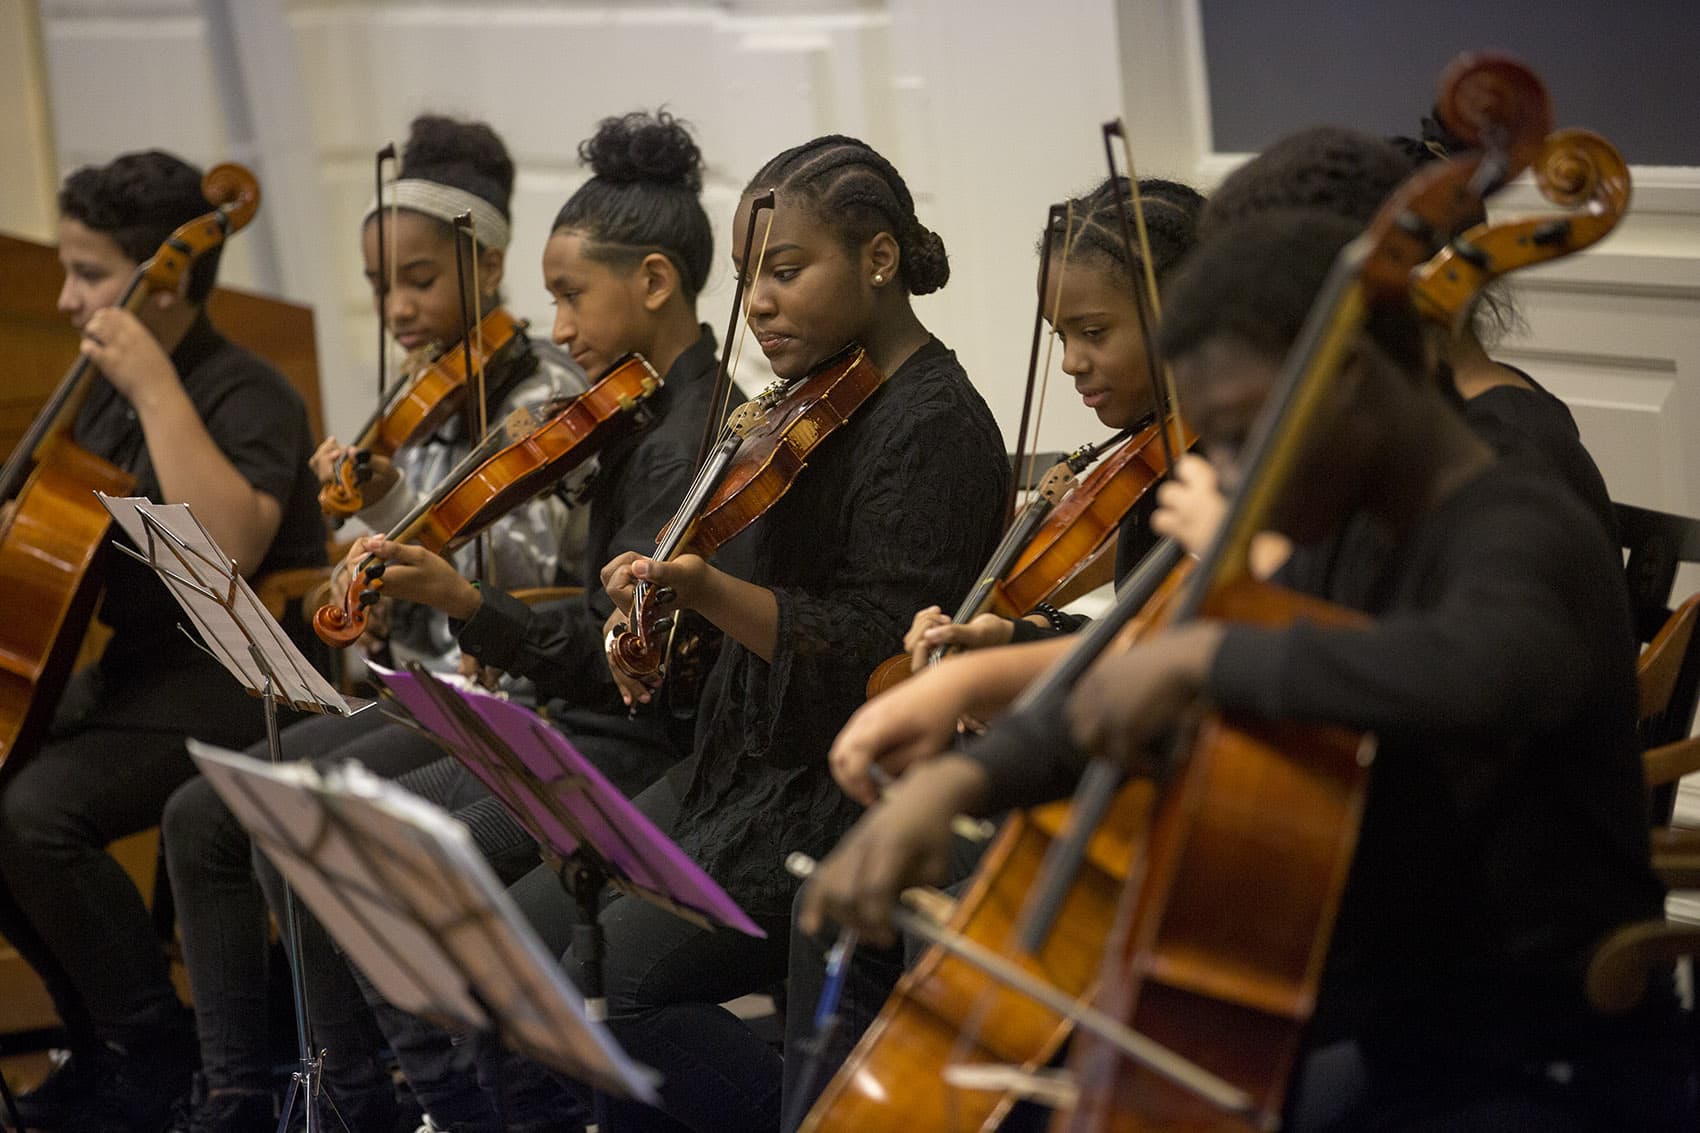 Students from the Conservatory Lab Charter School in Boston perform during a recent conference at the Harvard Graduate School of Education. (Jesse Costa/WBUR)